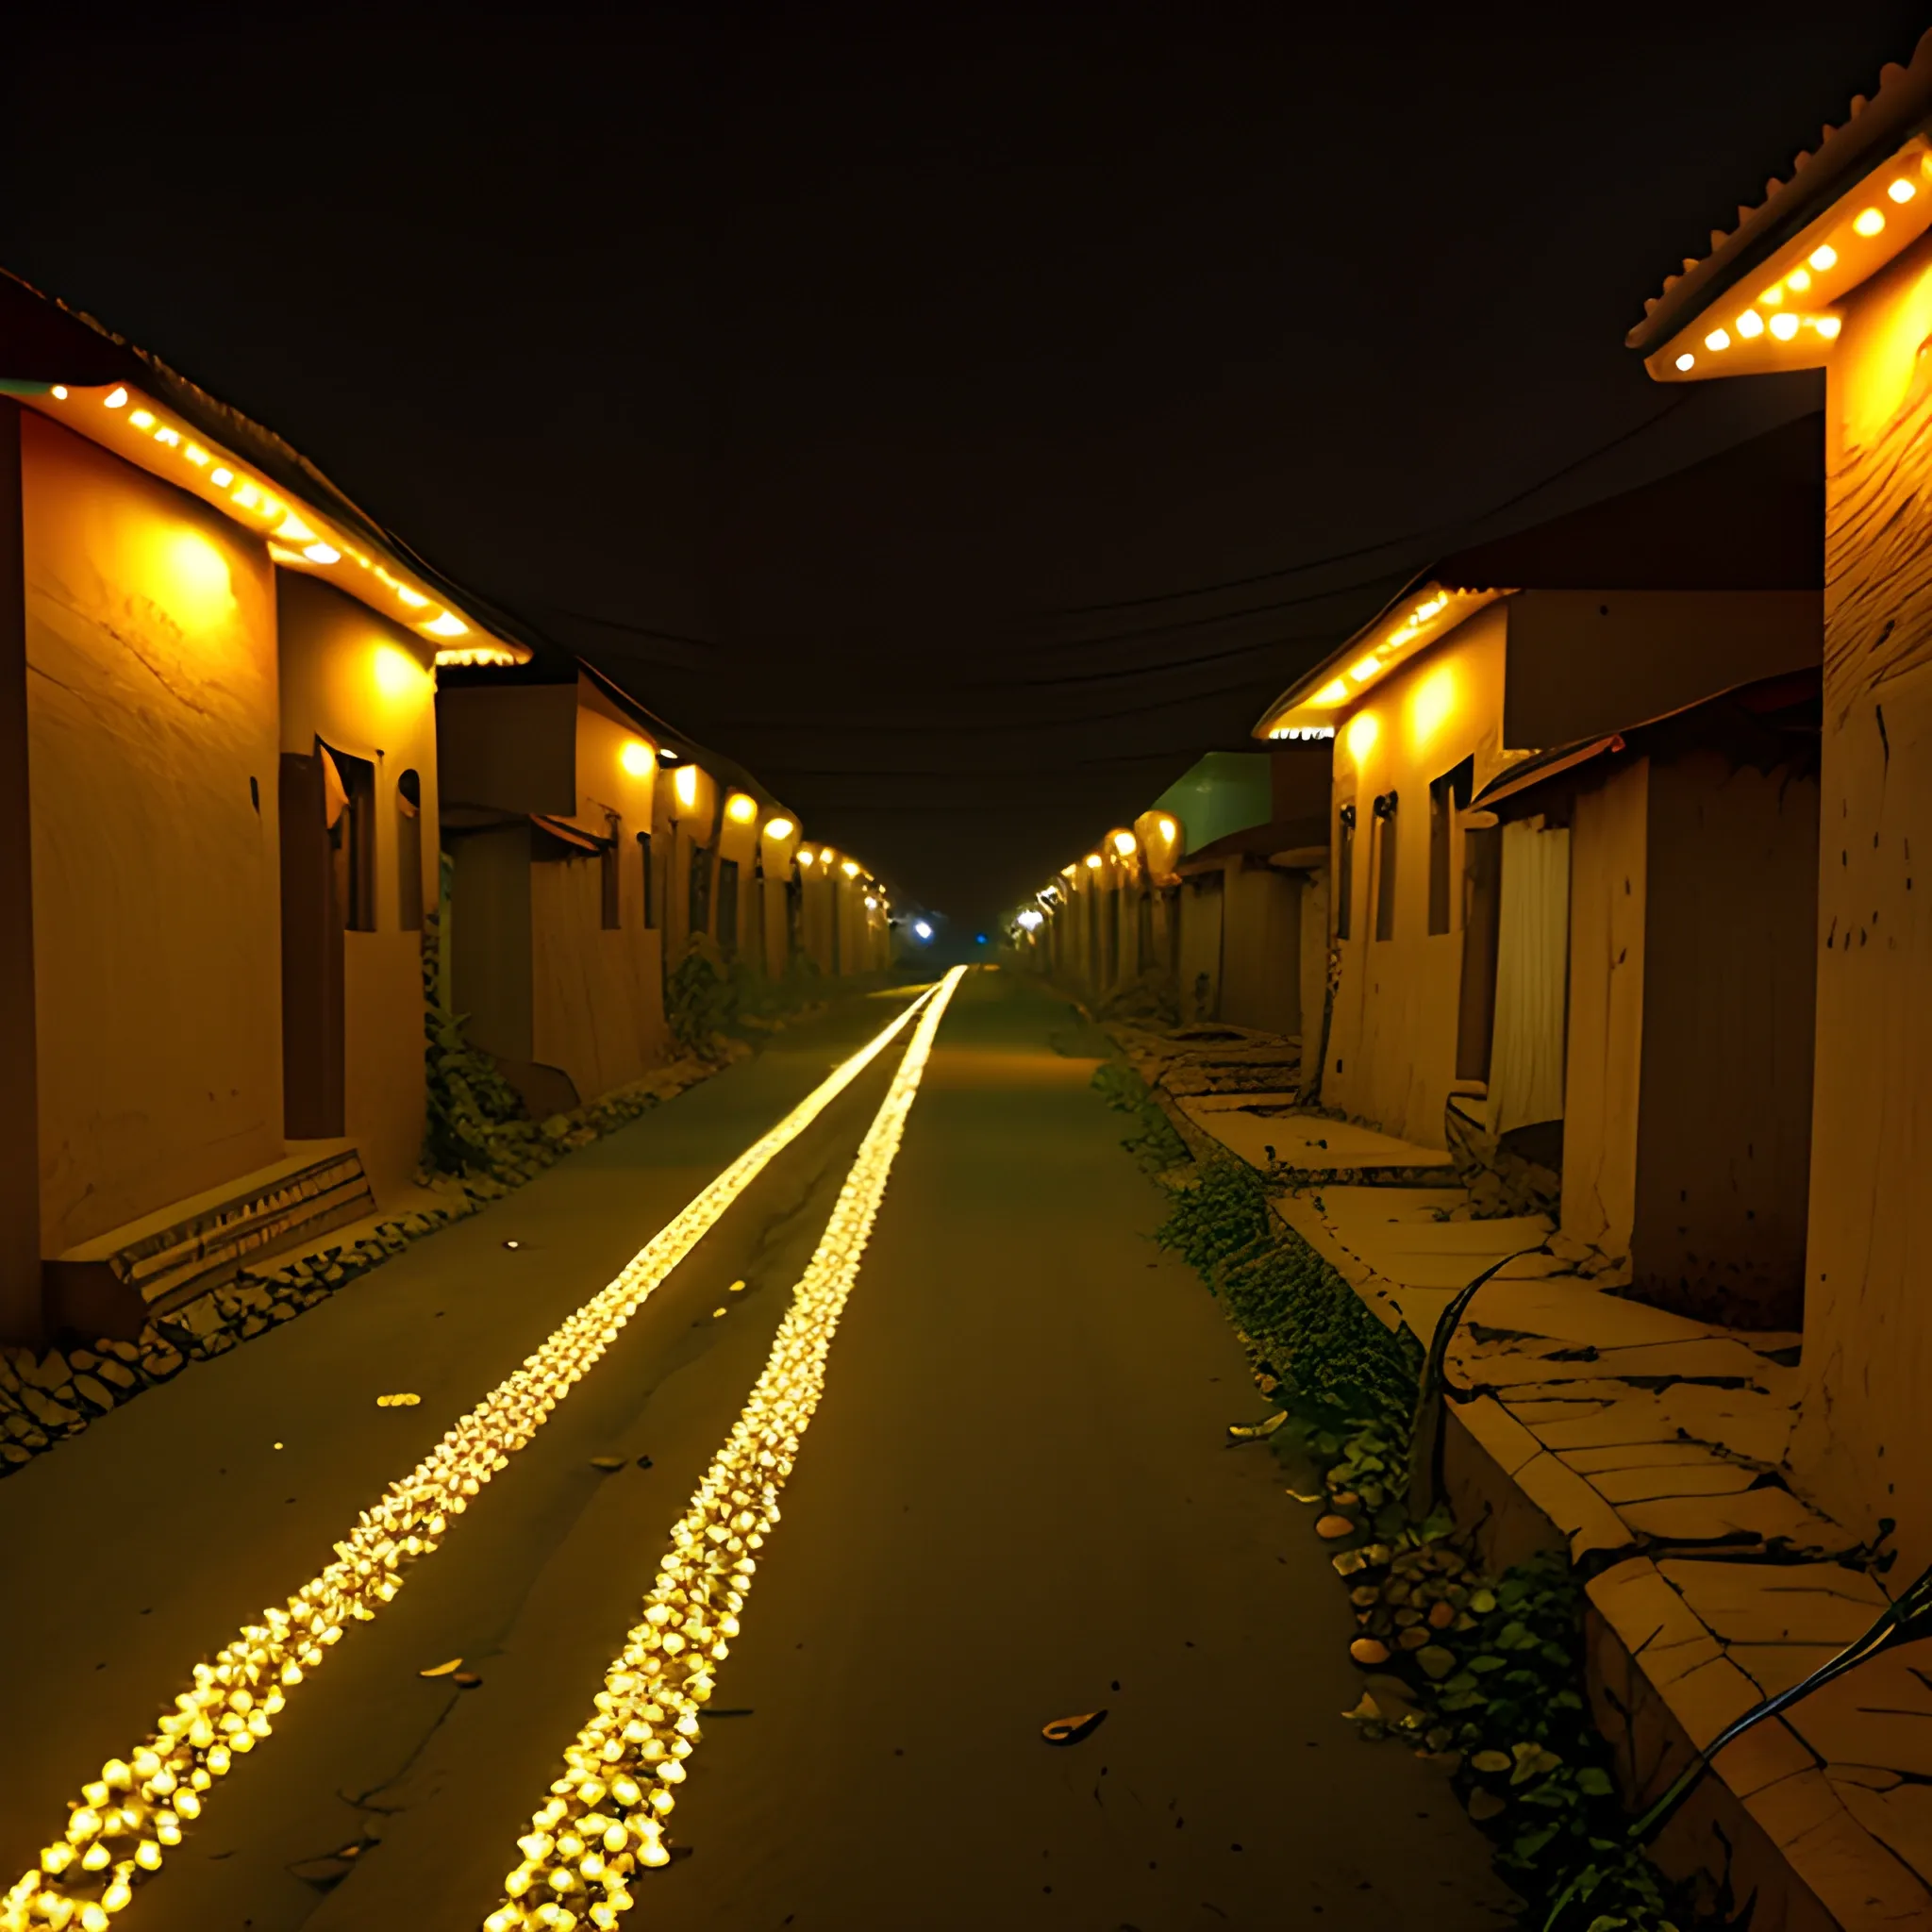 indian desi village, houses, road, alone, dark night, long exposure view, bulbs with lights,